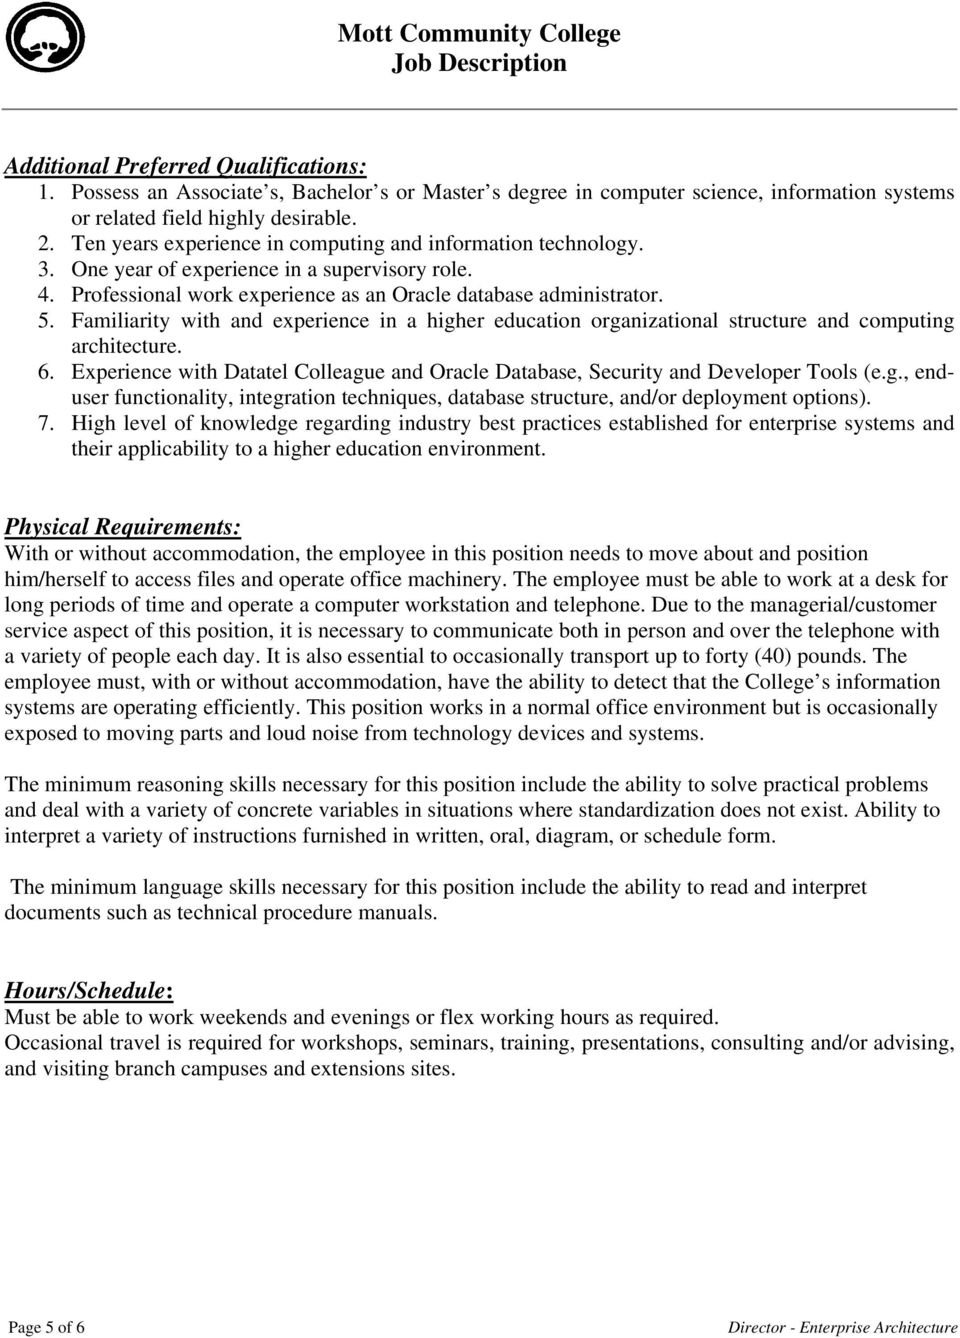 Familiarity with and experience in a higher education organizational structure and computing architecture. 6. Experience with Datatel Colleague and Oracle Database, Security and Developer Tools (e.g., enduser functionality, integration techniques, database structure, and/or deployment options).